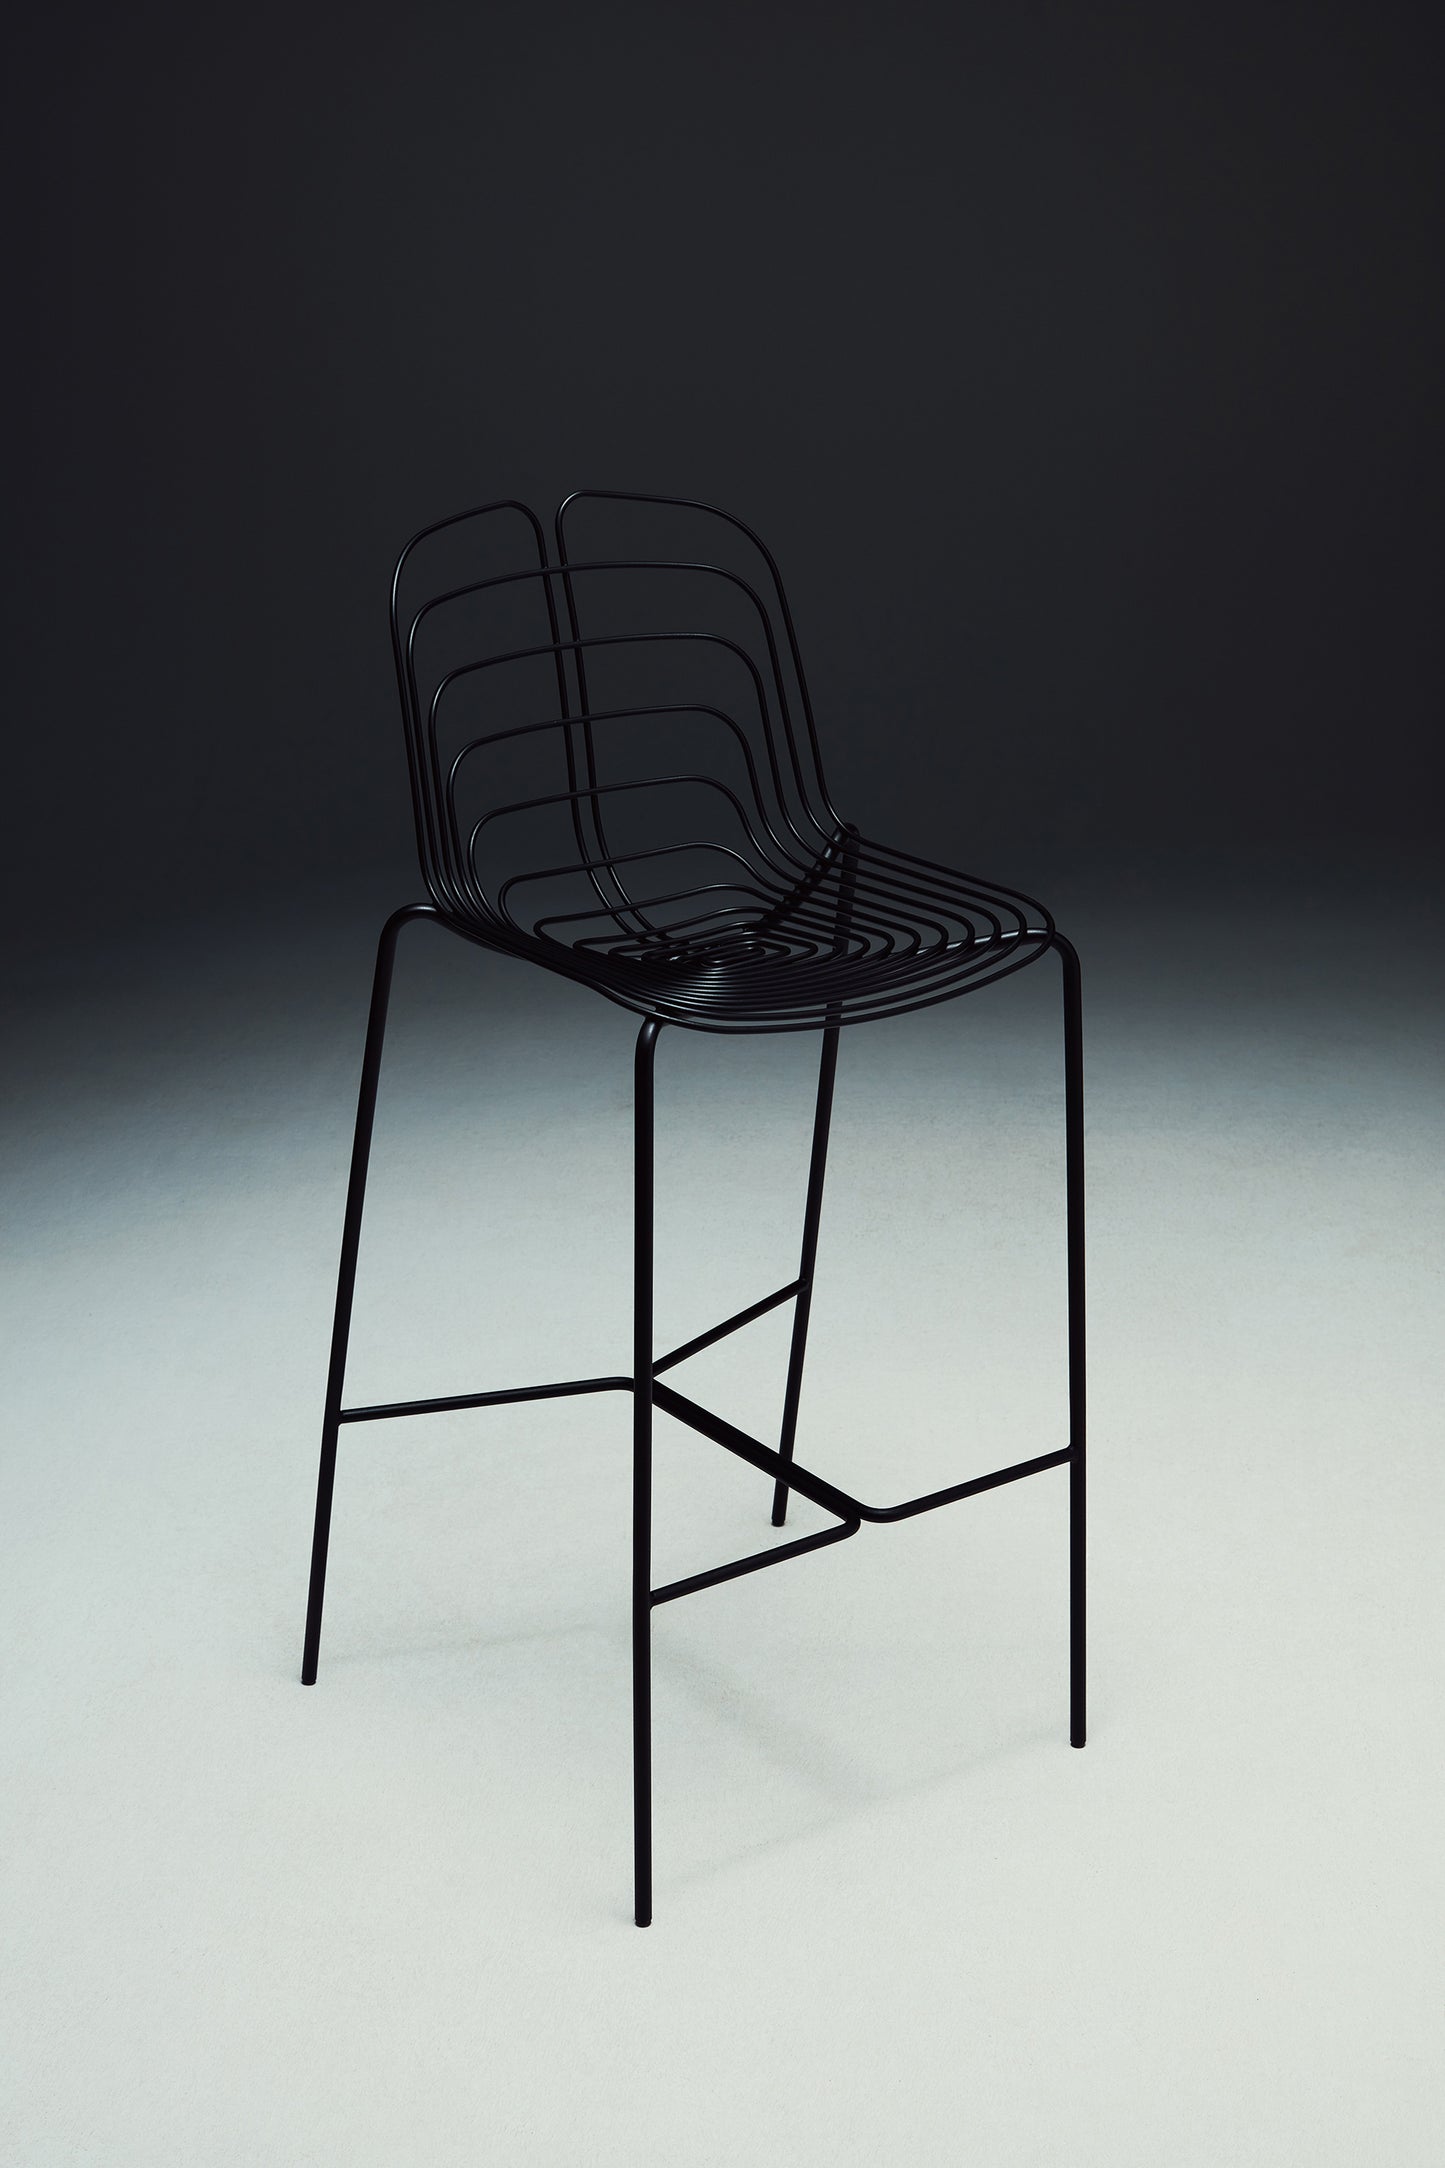 Wired Chair